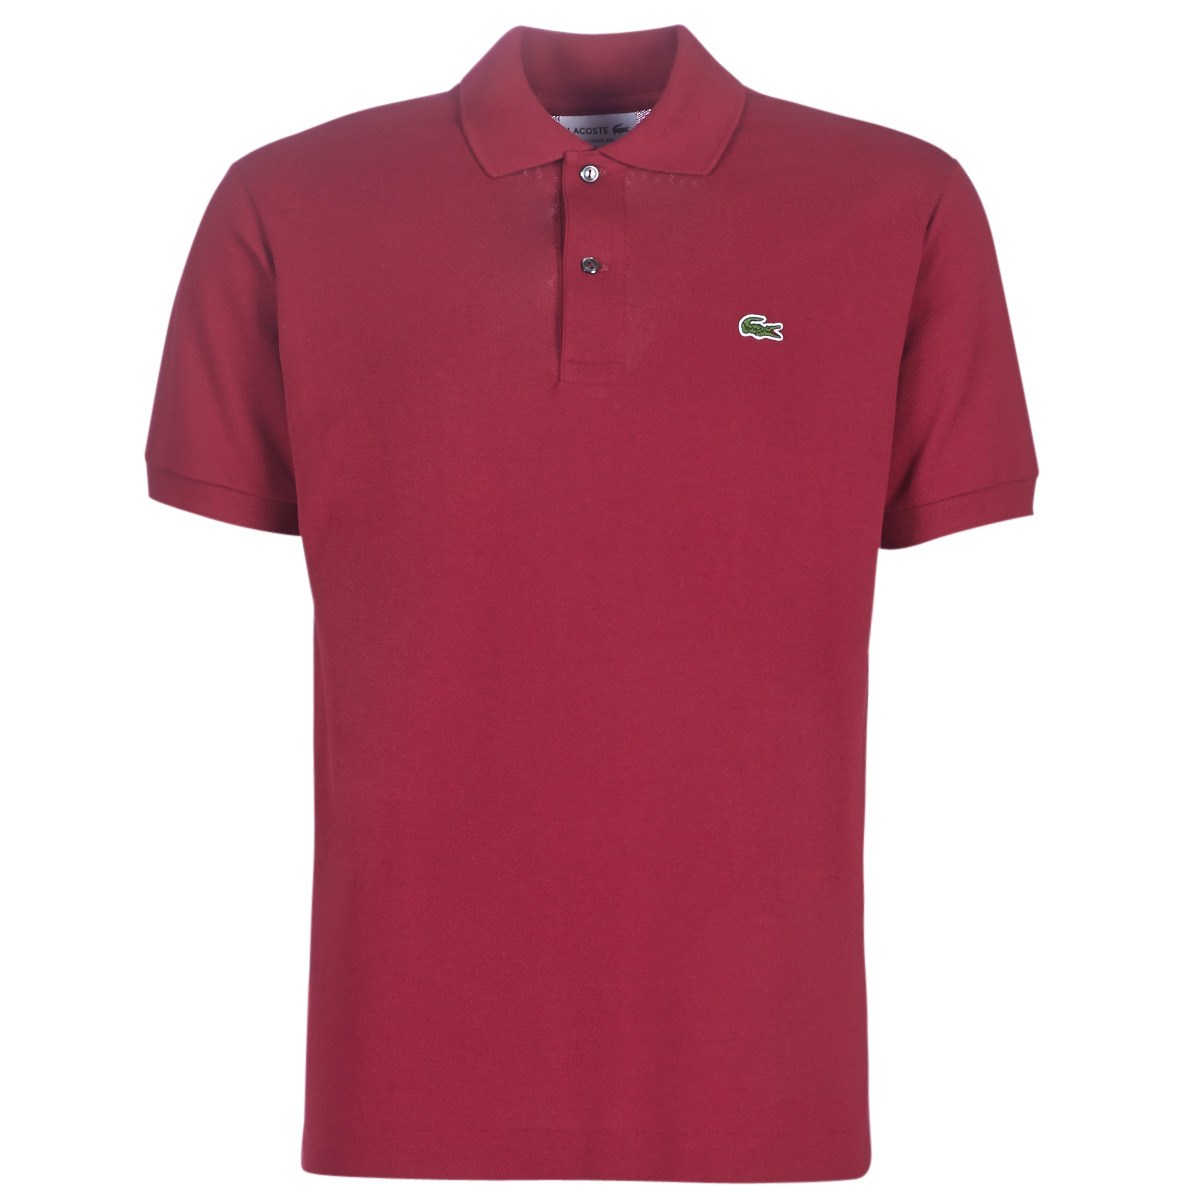 Lacoste POLO L12 12 Bordeaux - delivery | Spartoo Europe ! - polo shirts Men 95,00 €